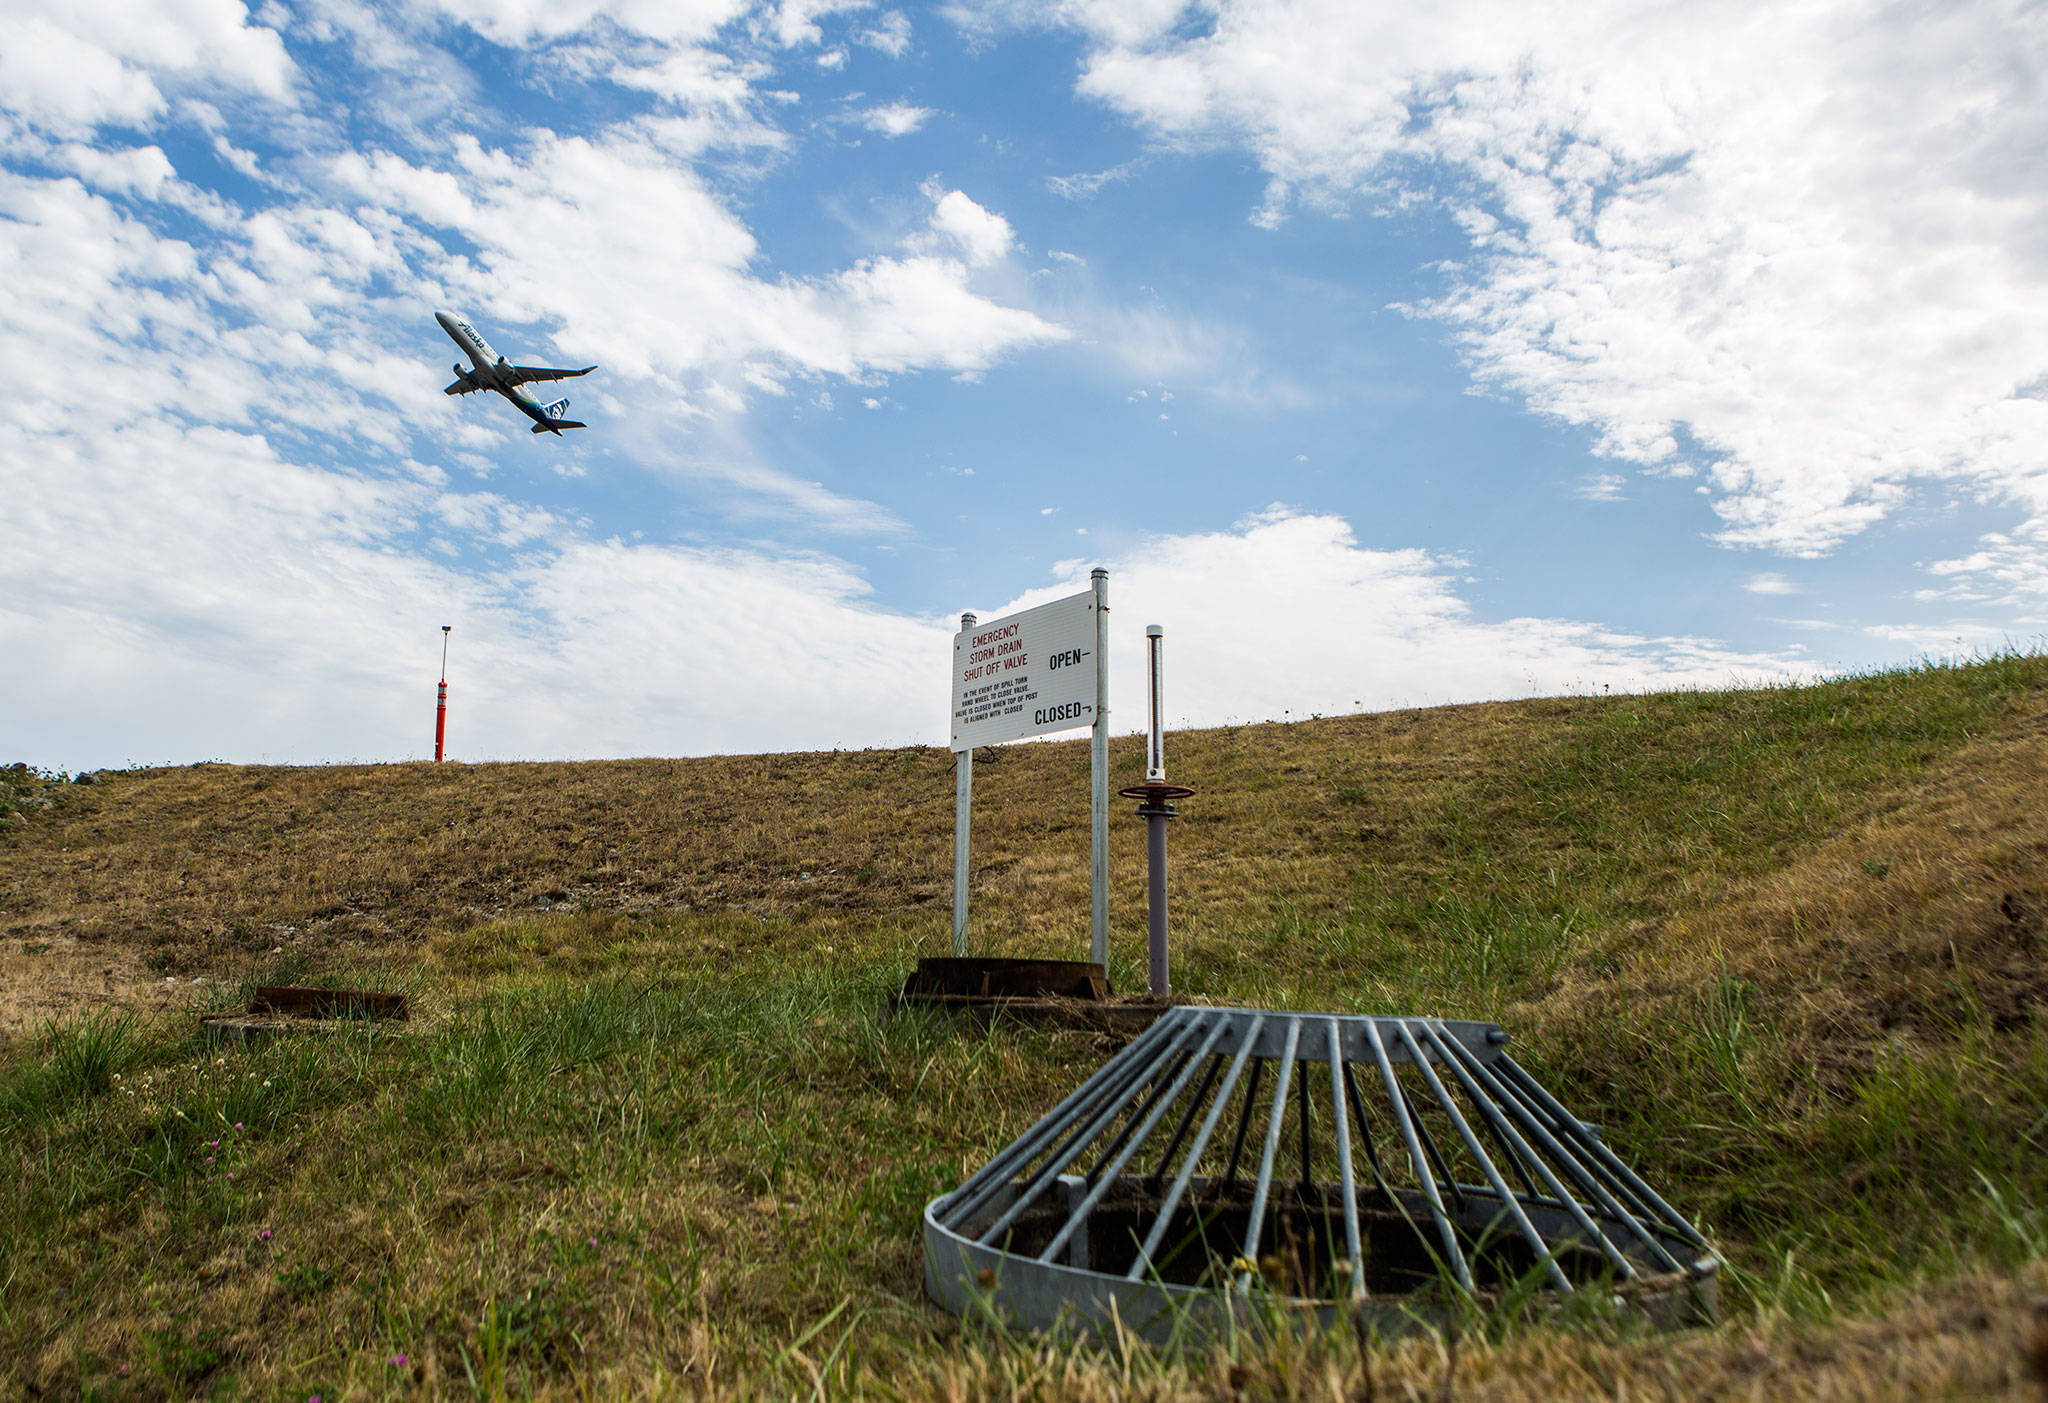 An airplane takes off from the runway over the top of one of the water drainage shut-off valves installed around Paine Field to help prevent water runoff contamination on Sept. 5 in Everett. (Olivia Vanni / The Herald)